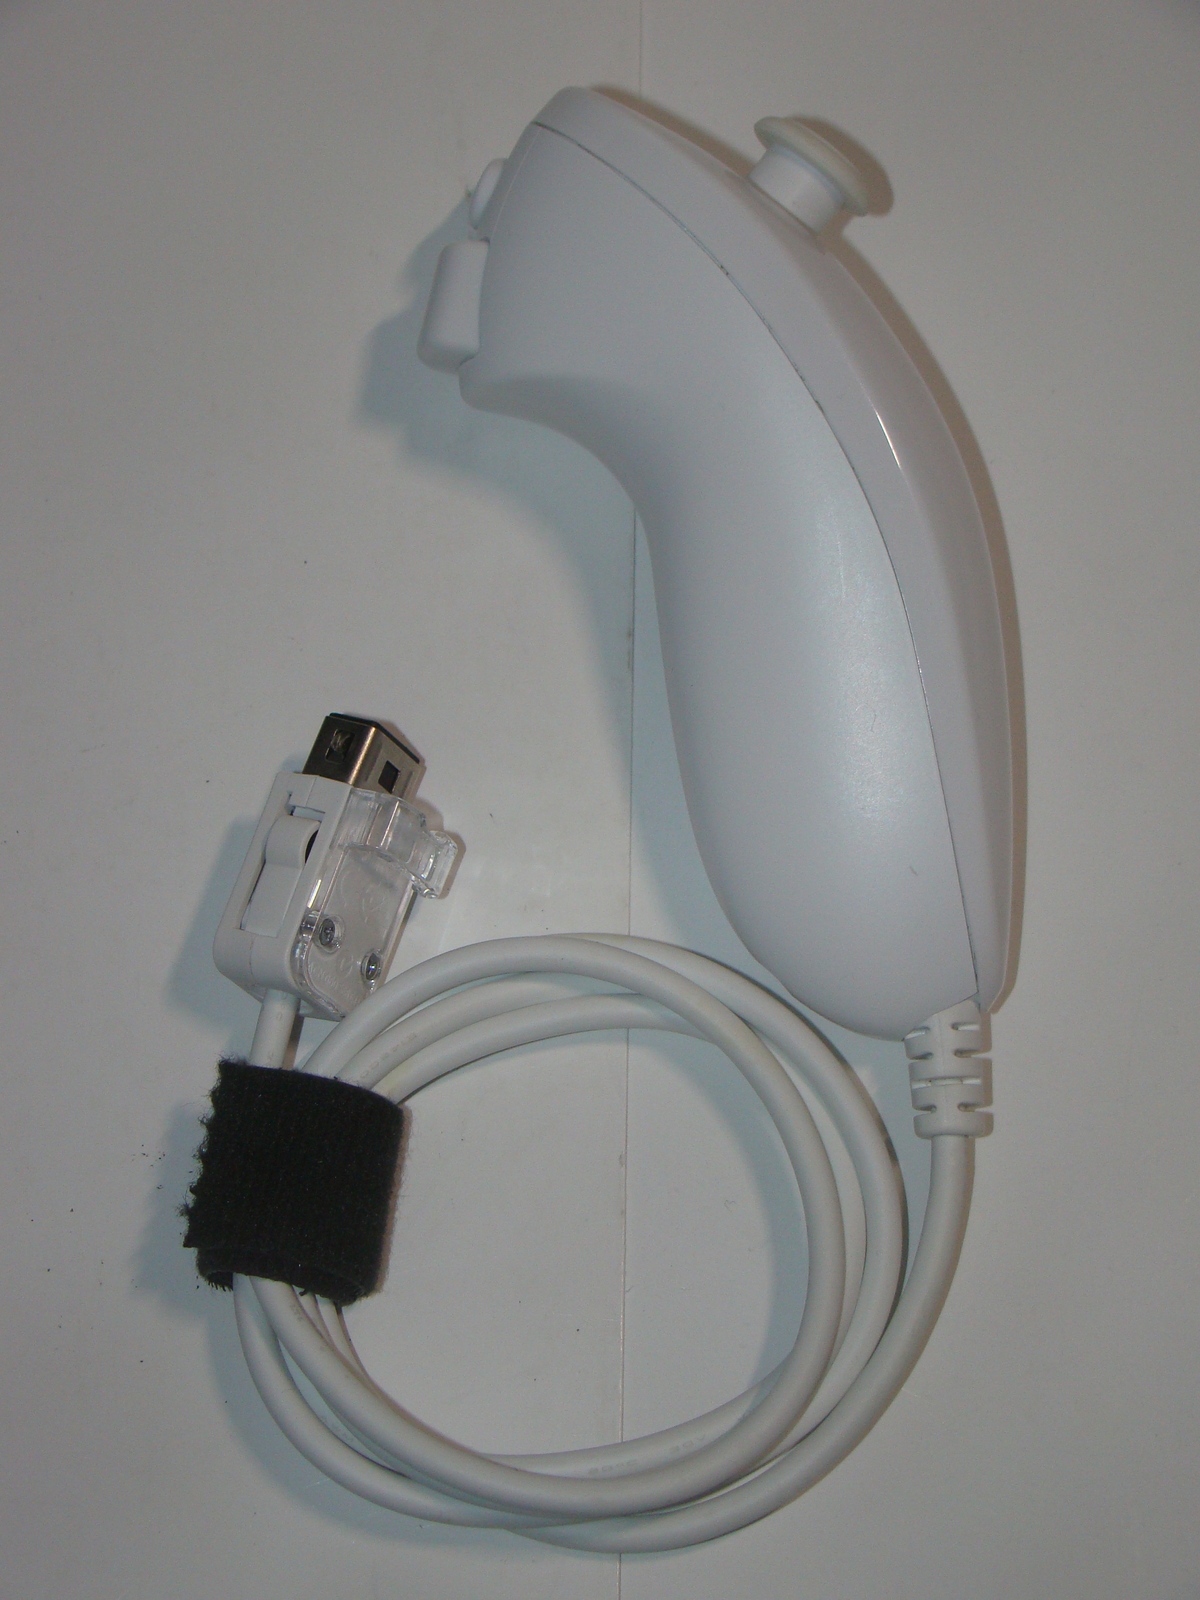 Nintendo Wii - Official OEM Nunchuck (White) - $12.00